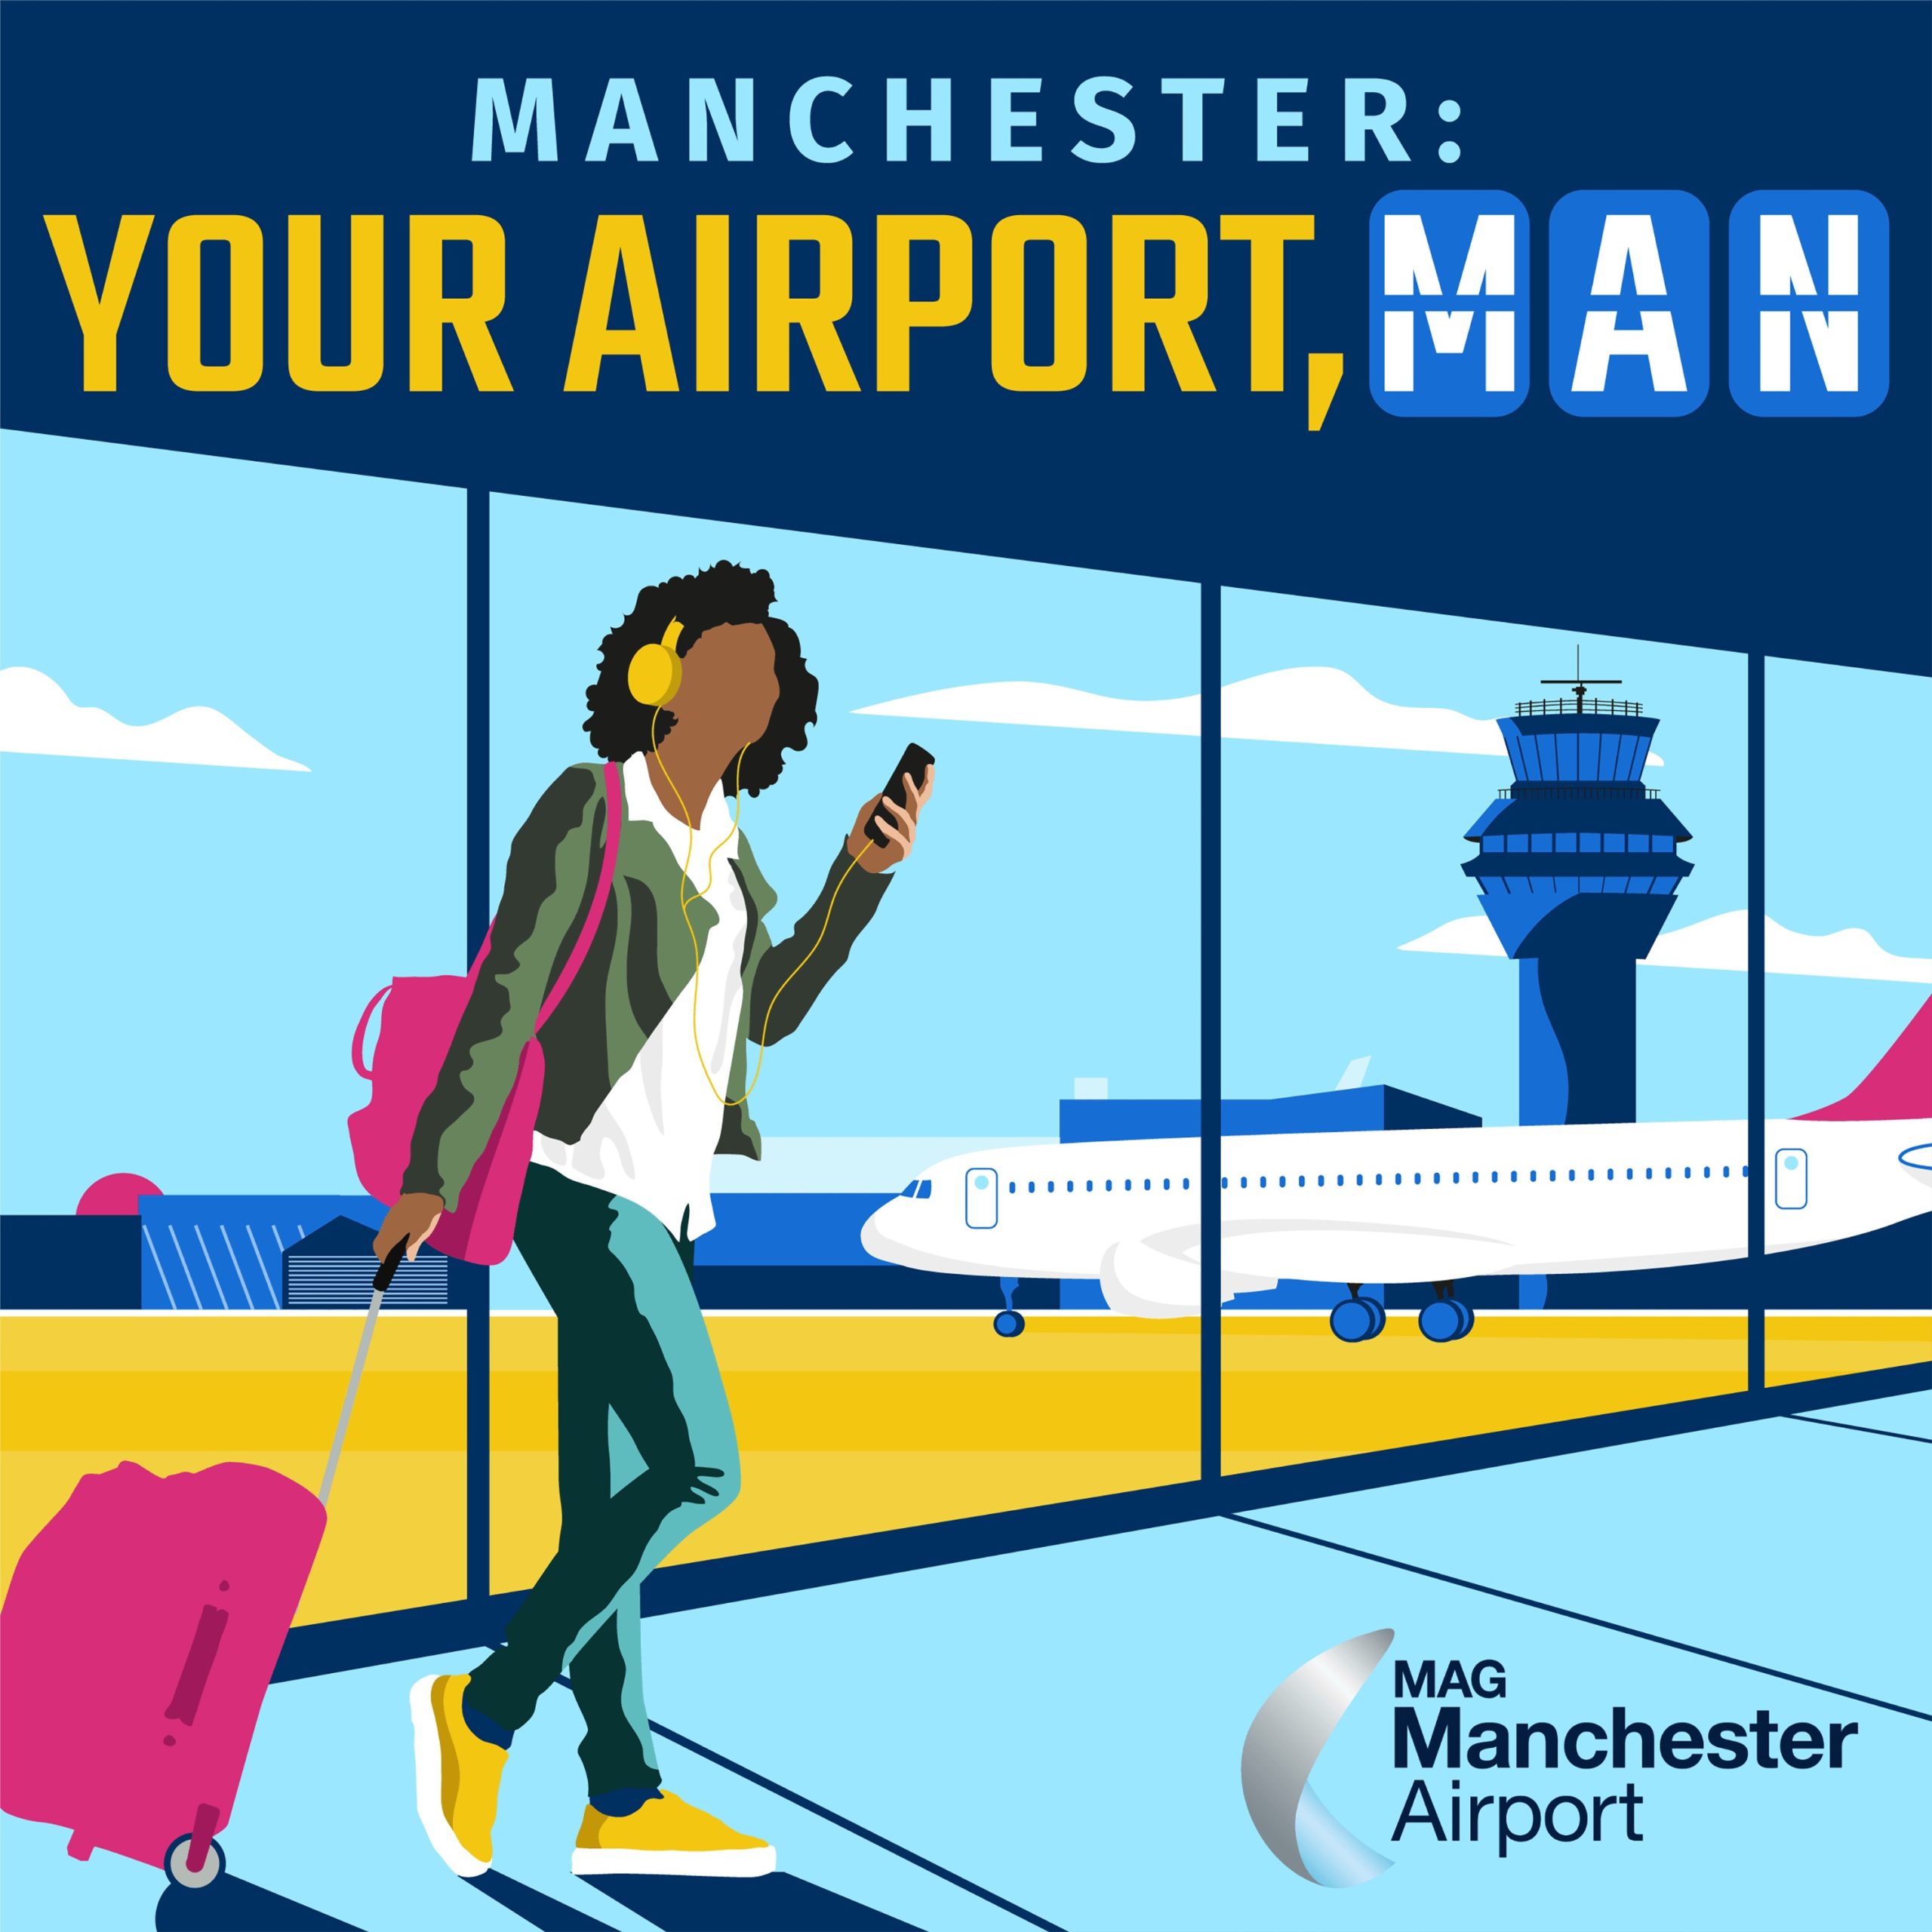 Manchester Airports Brand New Podcast “Your Airport”